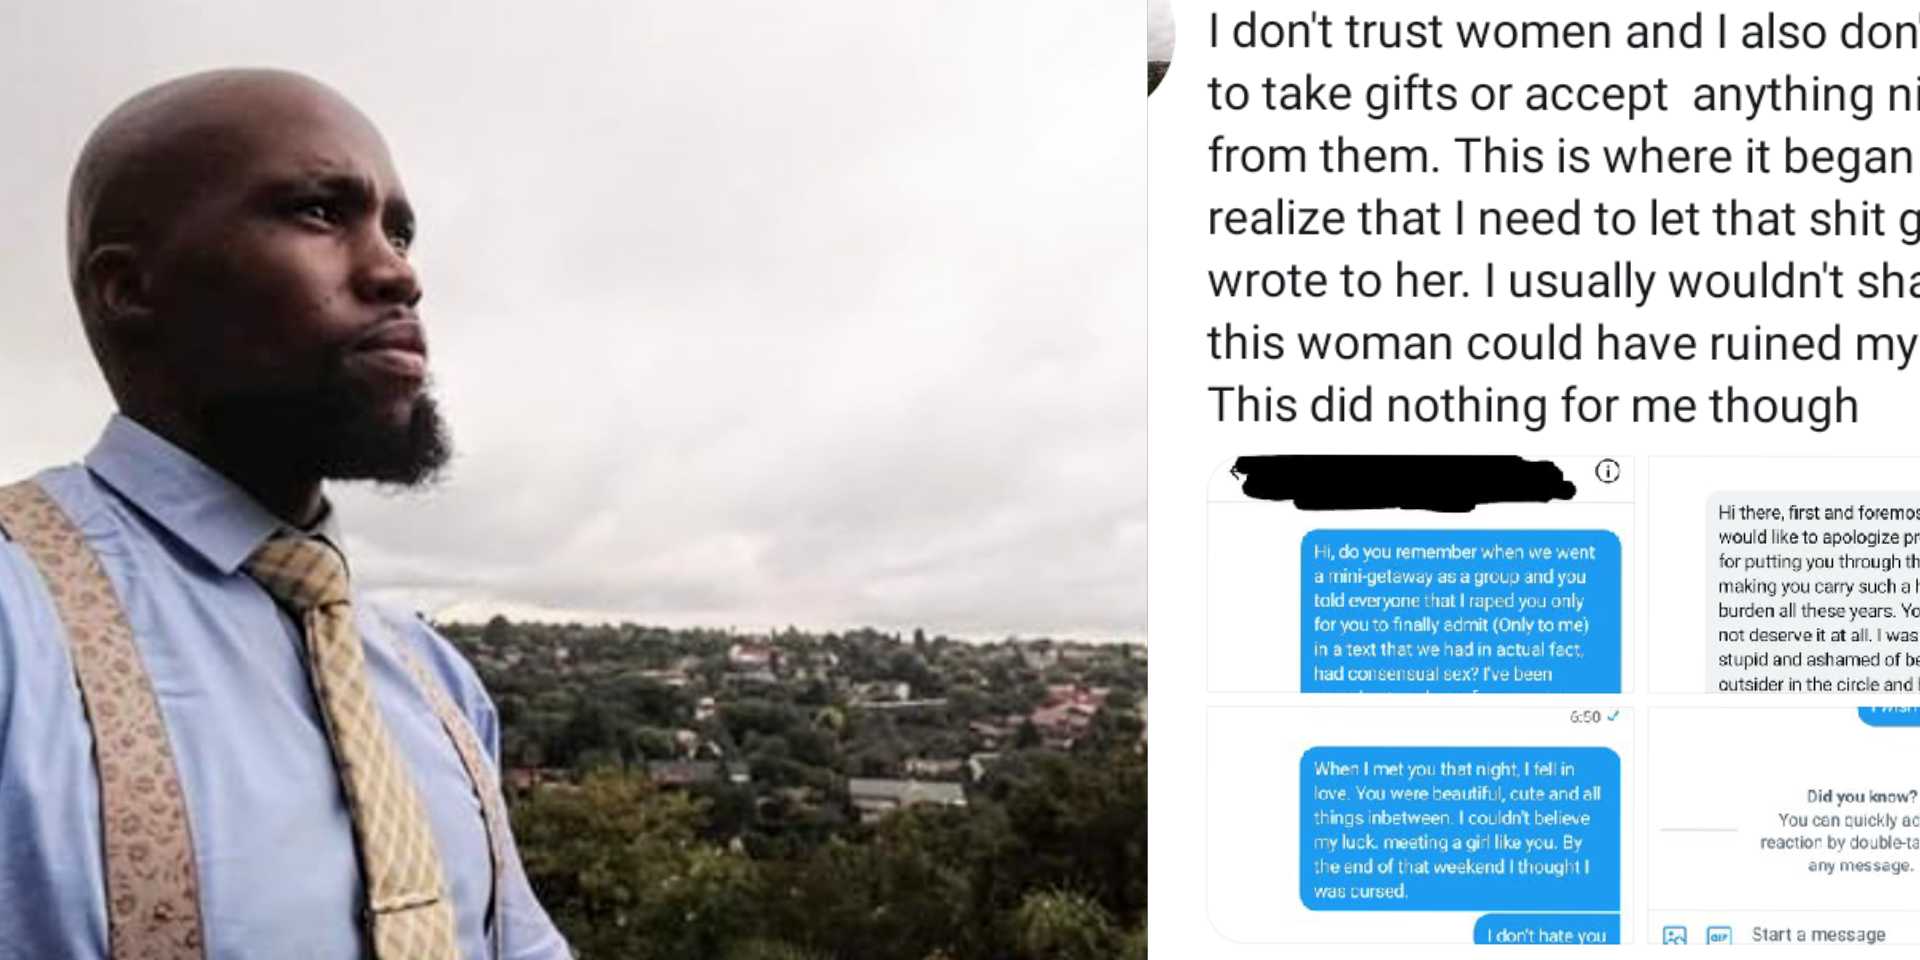 Man falsely accused of rape confronts his accuser years later; shares their chat where she confessed [Screenshots]